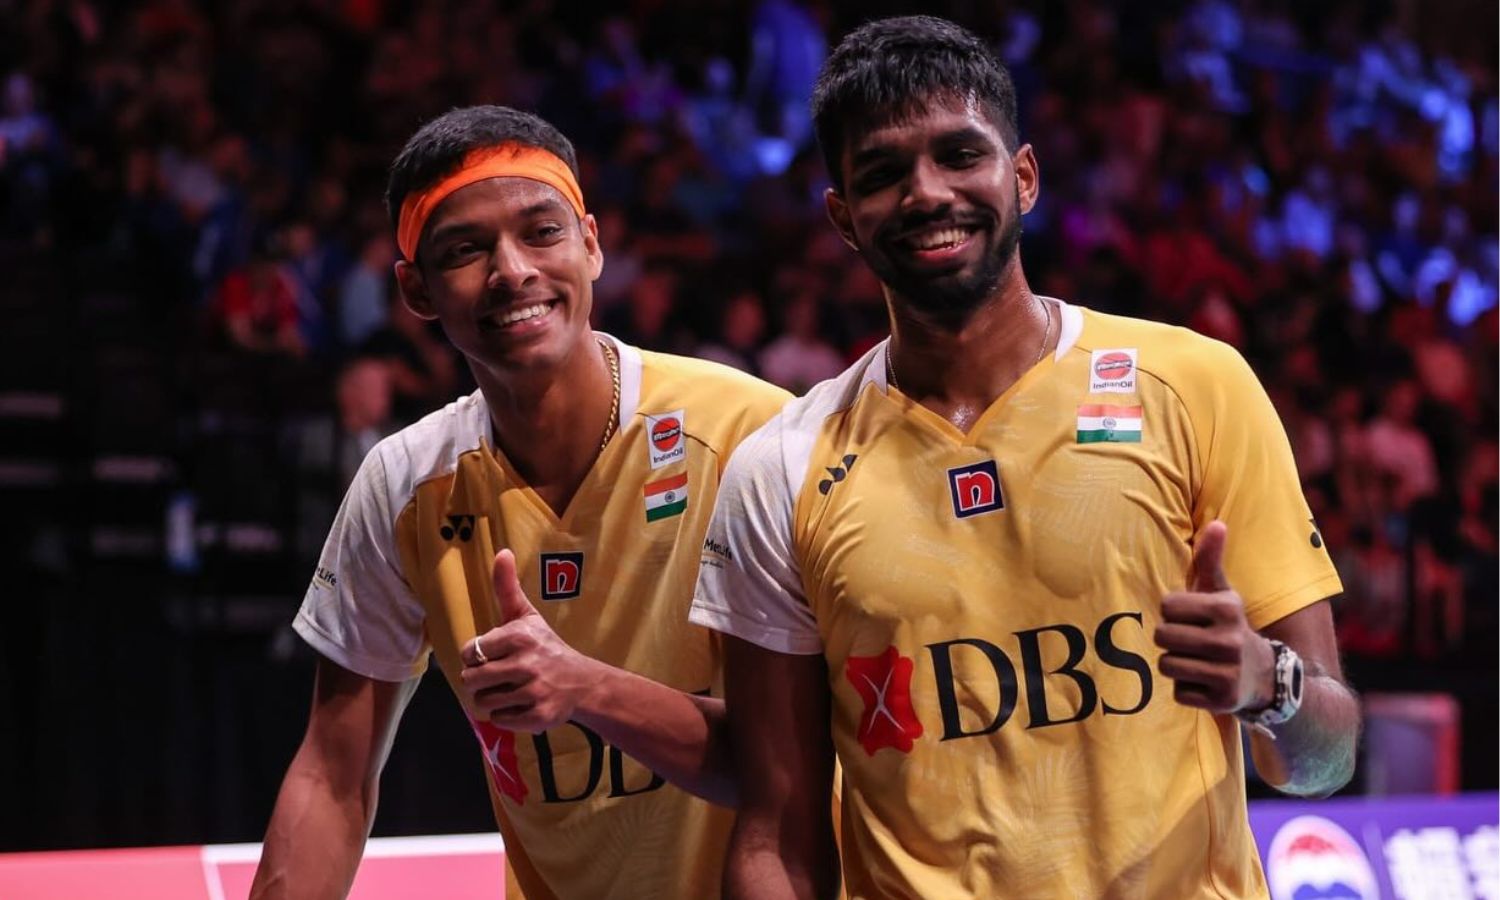 You are currently viewing Satwik/Chirag reach final, defeats World Champion pair